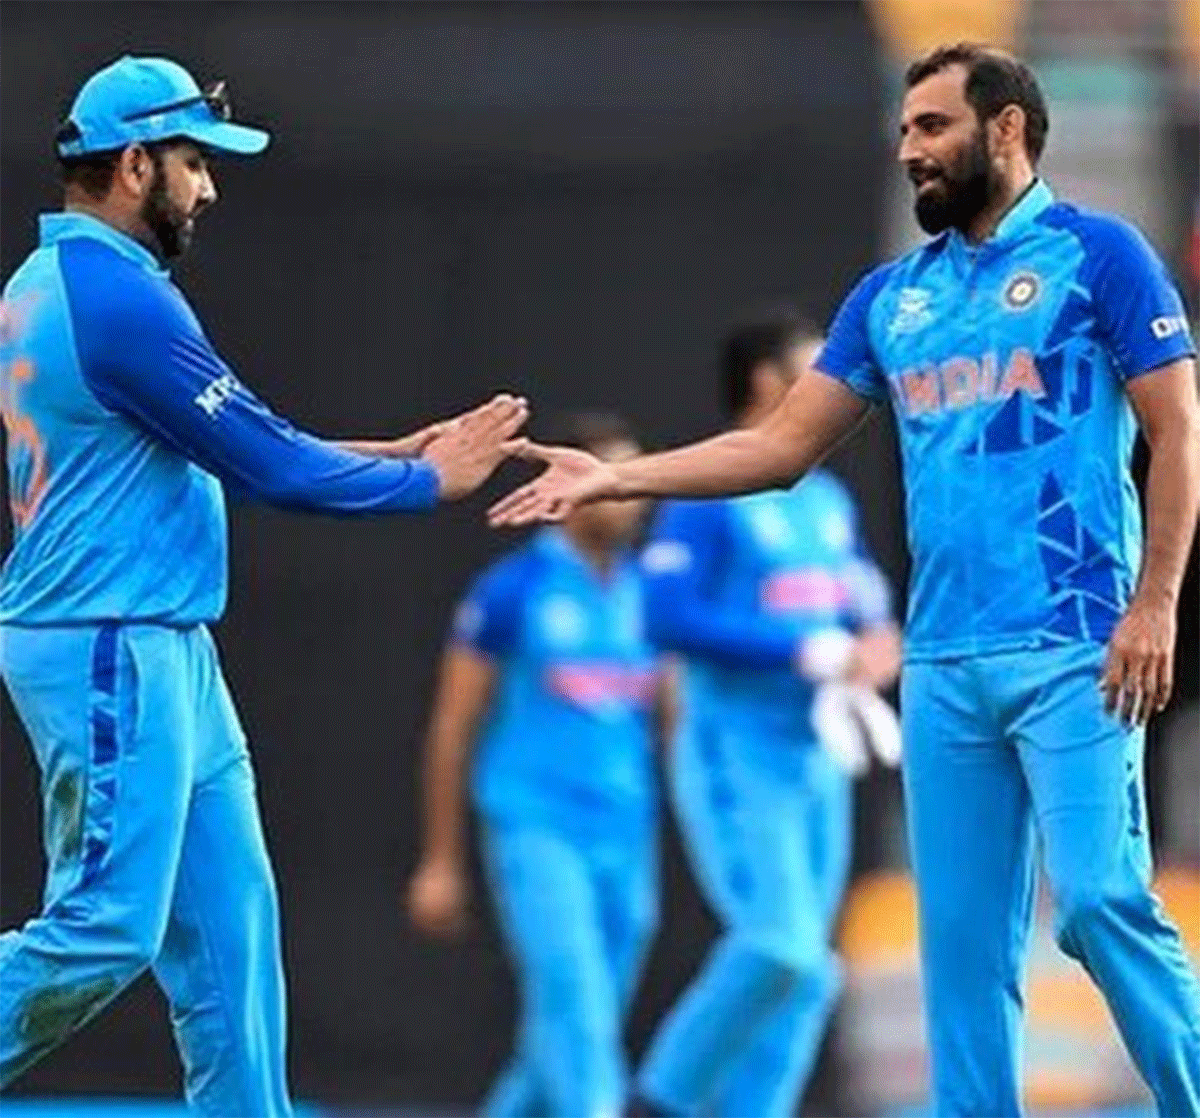 Mohammed Shami who has been drafted in as replacement for injured Jasprit Bumrah put on an impressive show in the warm-up match against Australia 